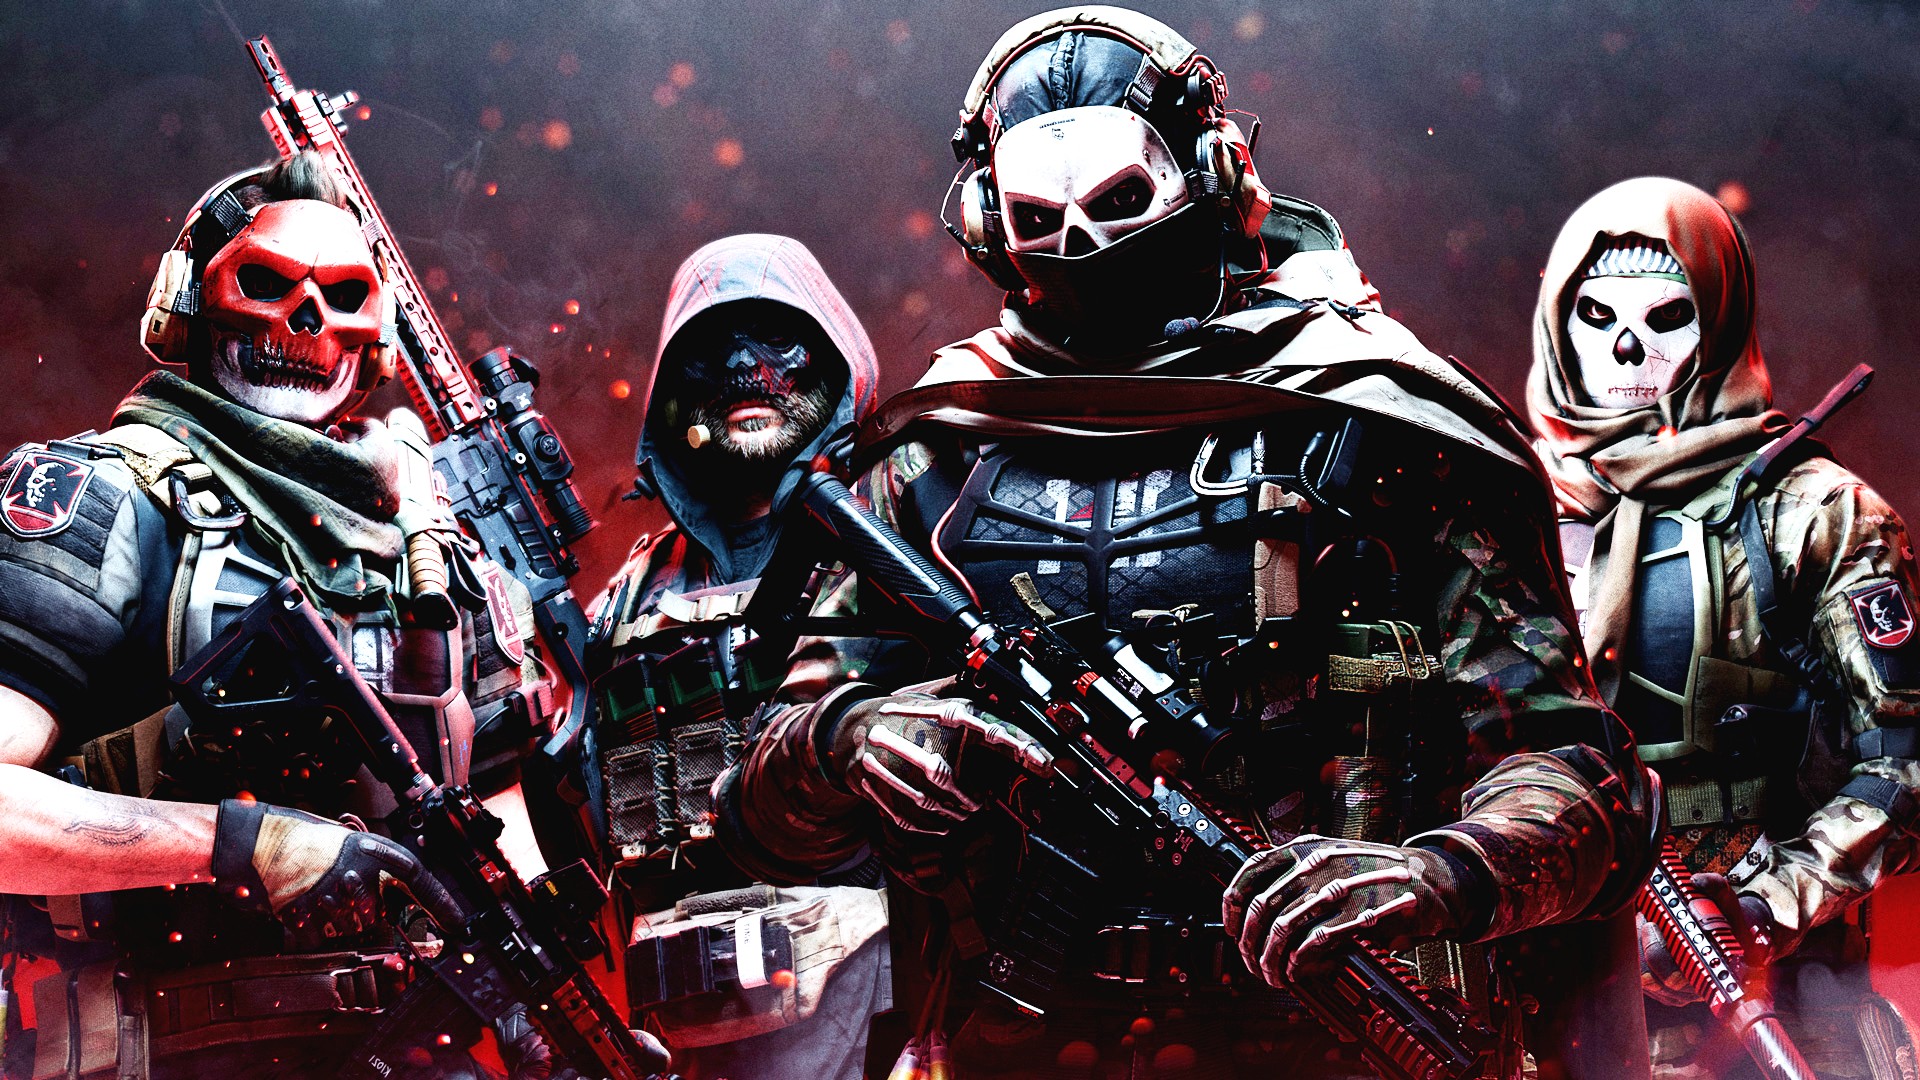 Warzone 2 and MW2 Season 6: Release date, Operators, and more